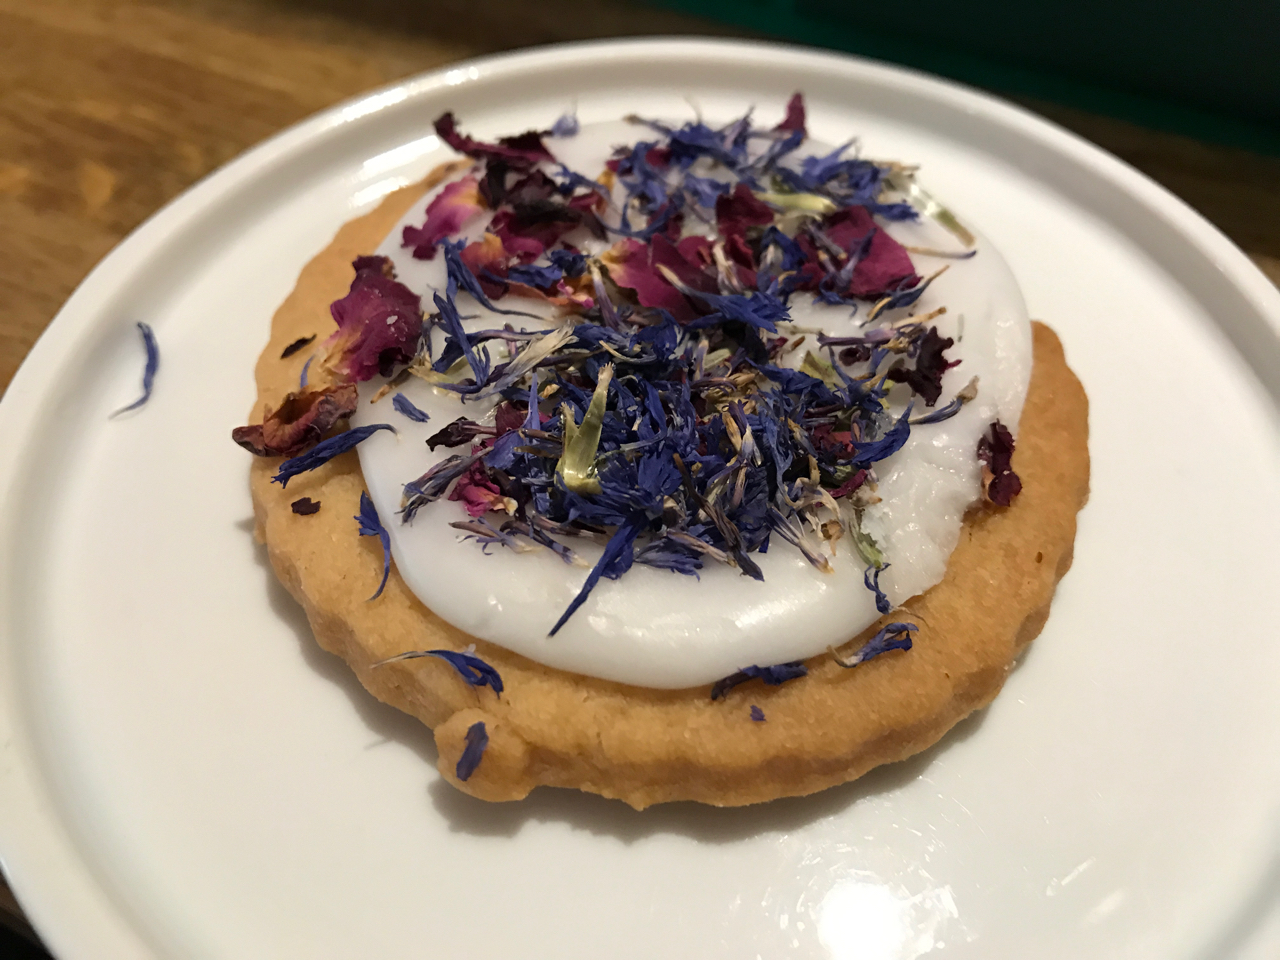 Sablés Aux Fleurs - A stunning shortbread cookie with white icing and purple and pink dried flowers at Peonies Café and Flower Shop in Paris, France.